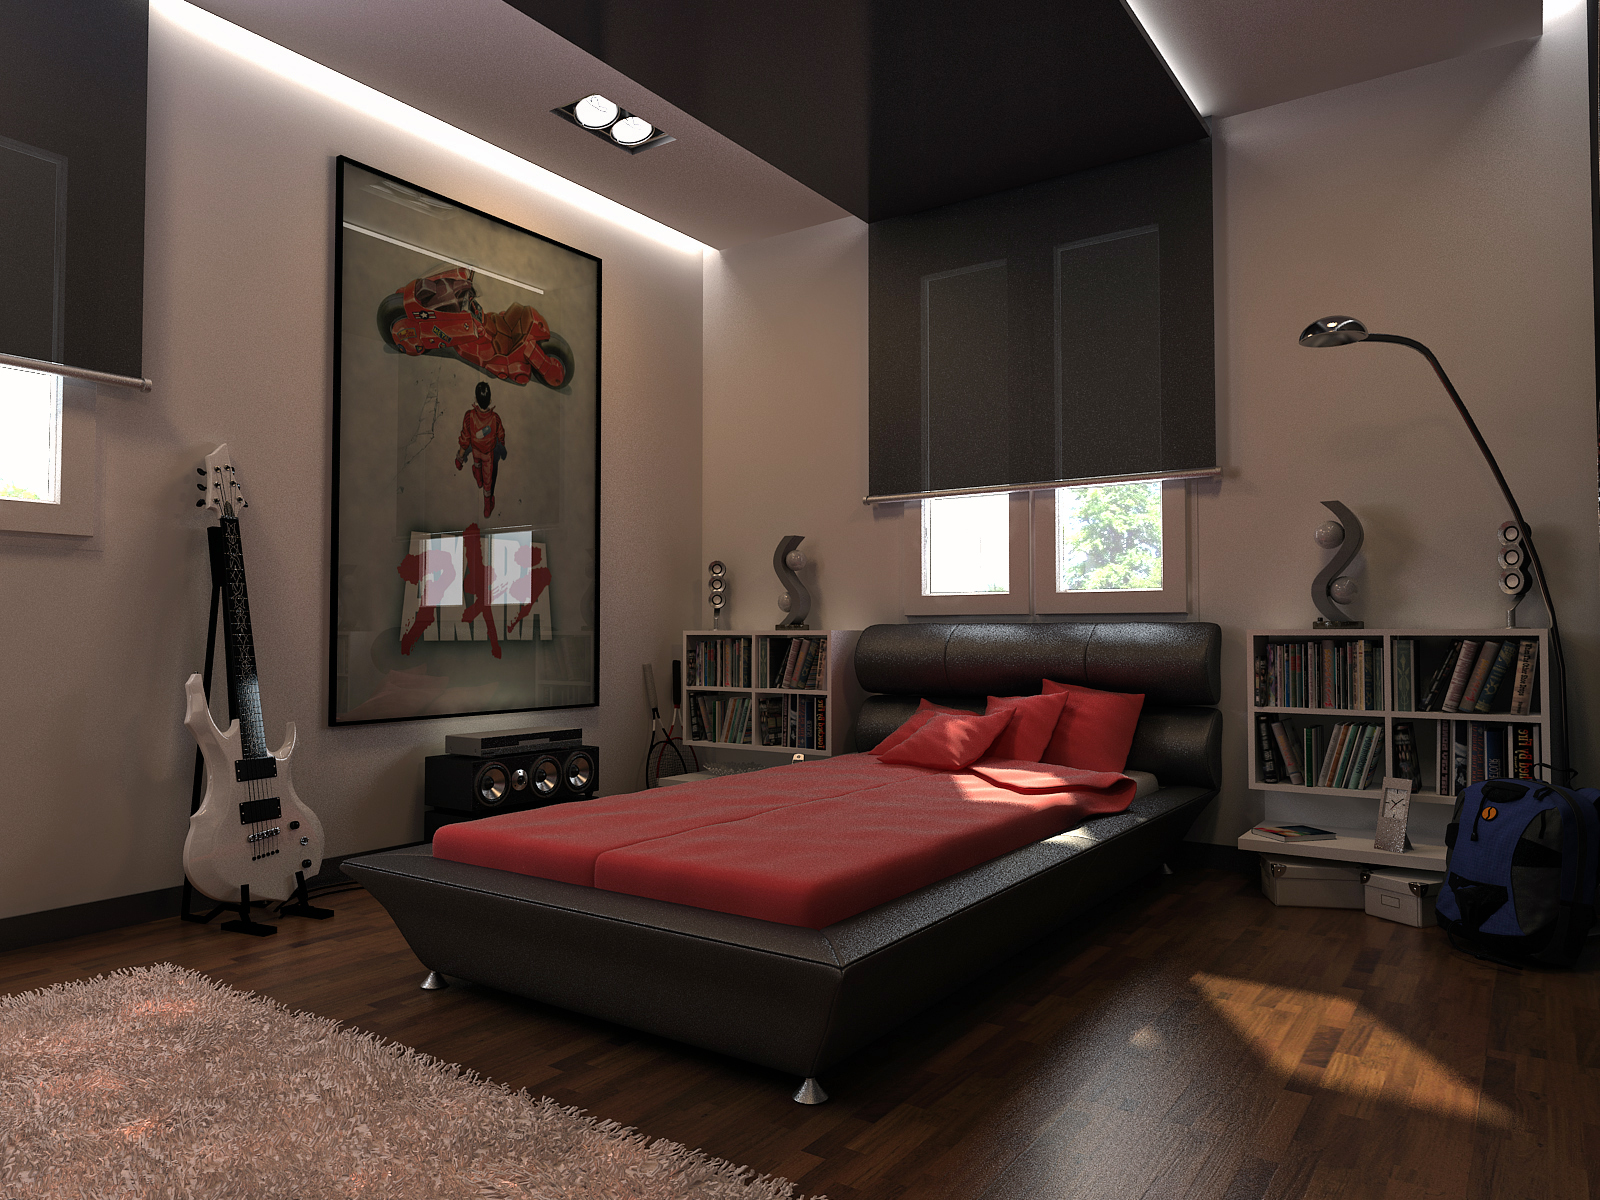 Cool Rooms For Guys - 1600x1200 Wallpaper 